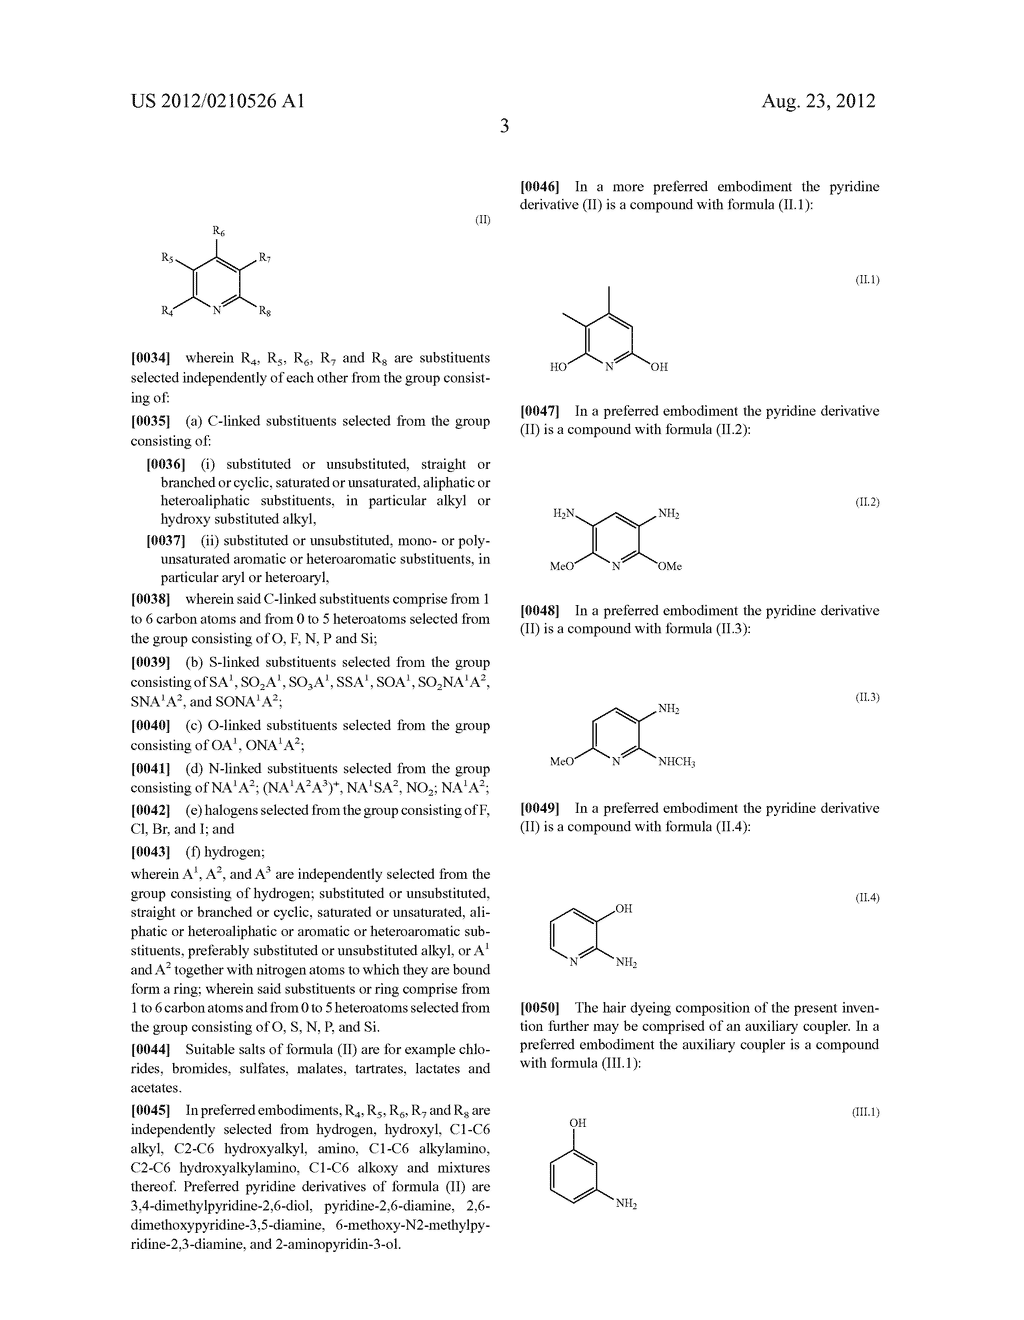 Oxidative Dyeing Compositions Comprising an     1-Hexyl/Heptyl-4,5-diaminopyrazole and a Pyridine and Derivatives Thereof - diagram, schematic, and image 05